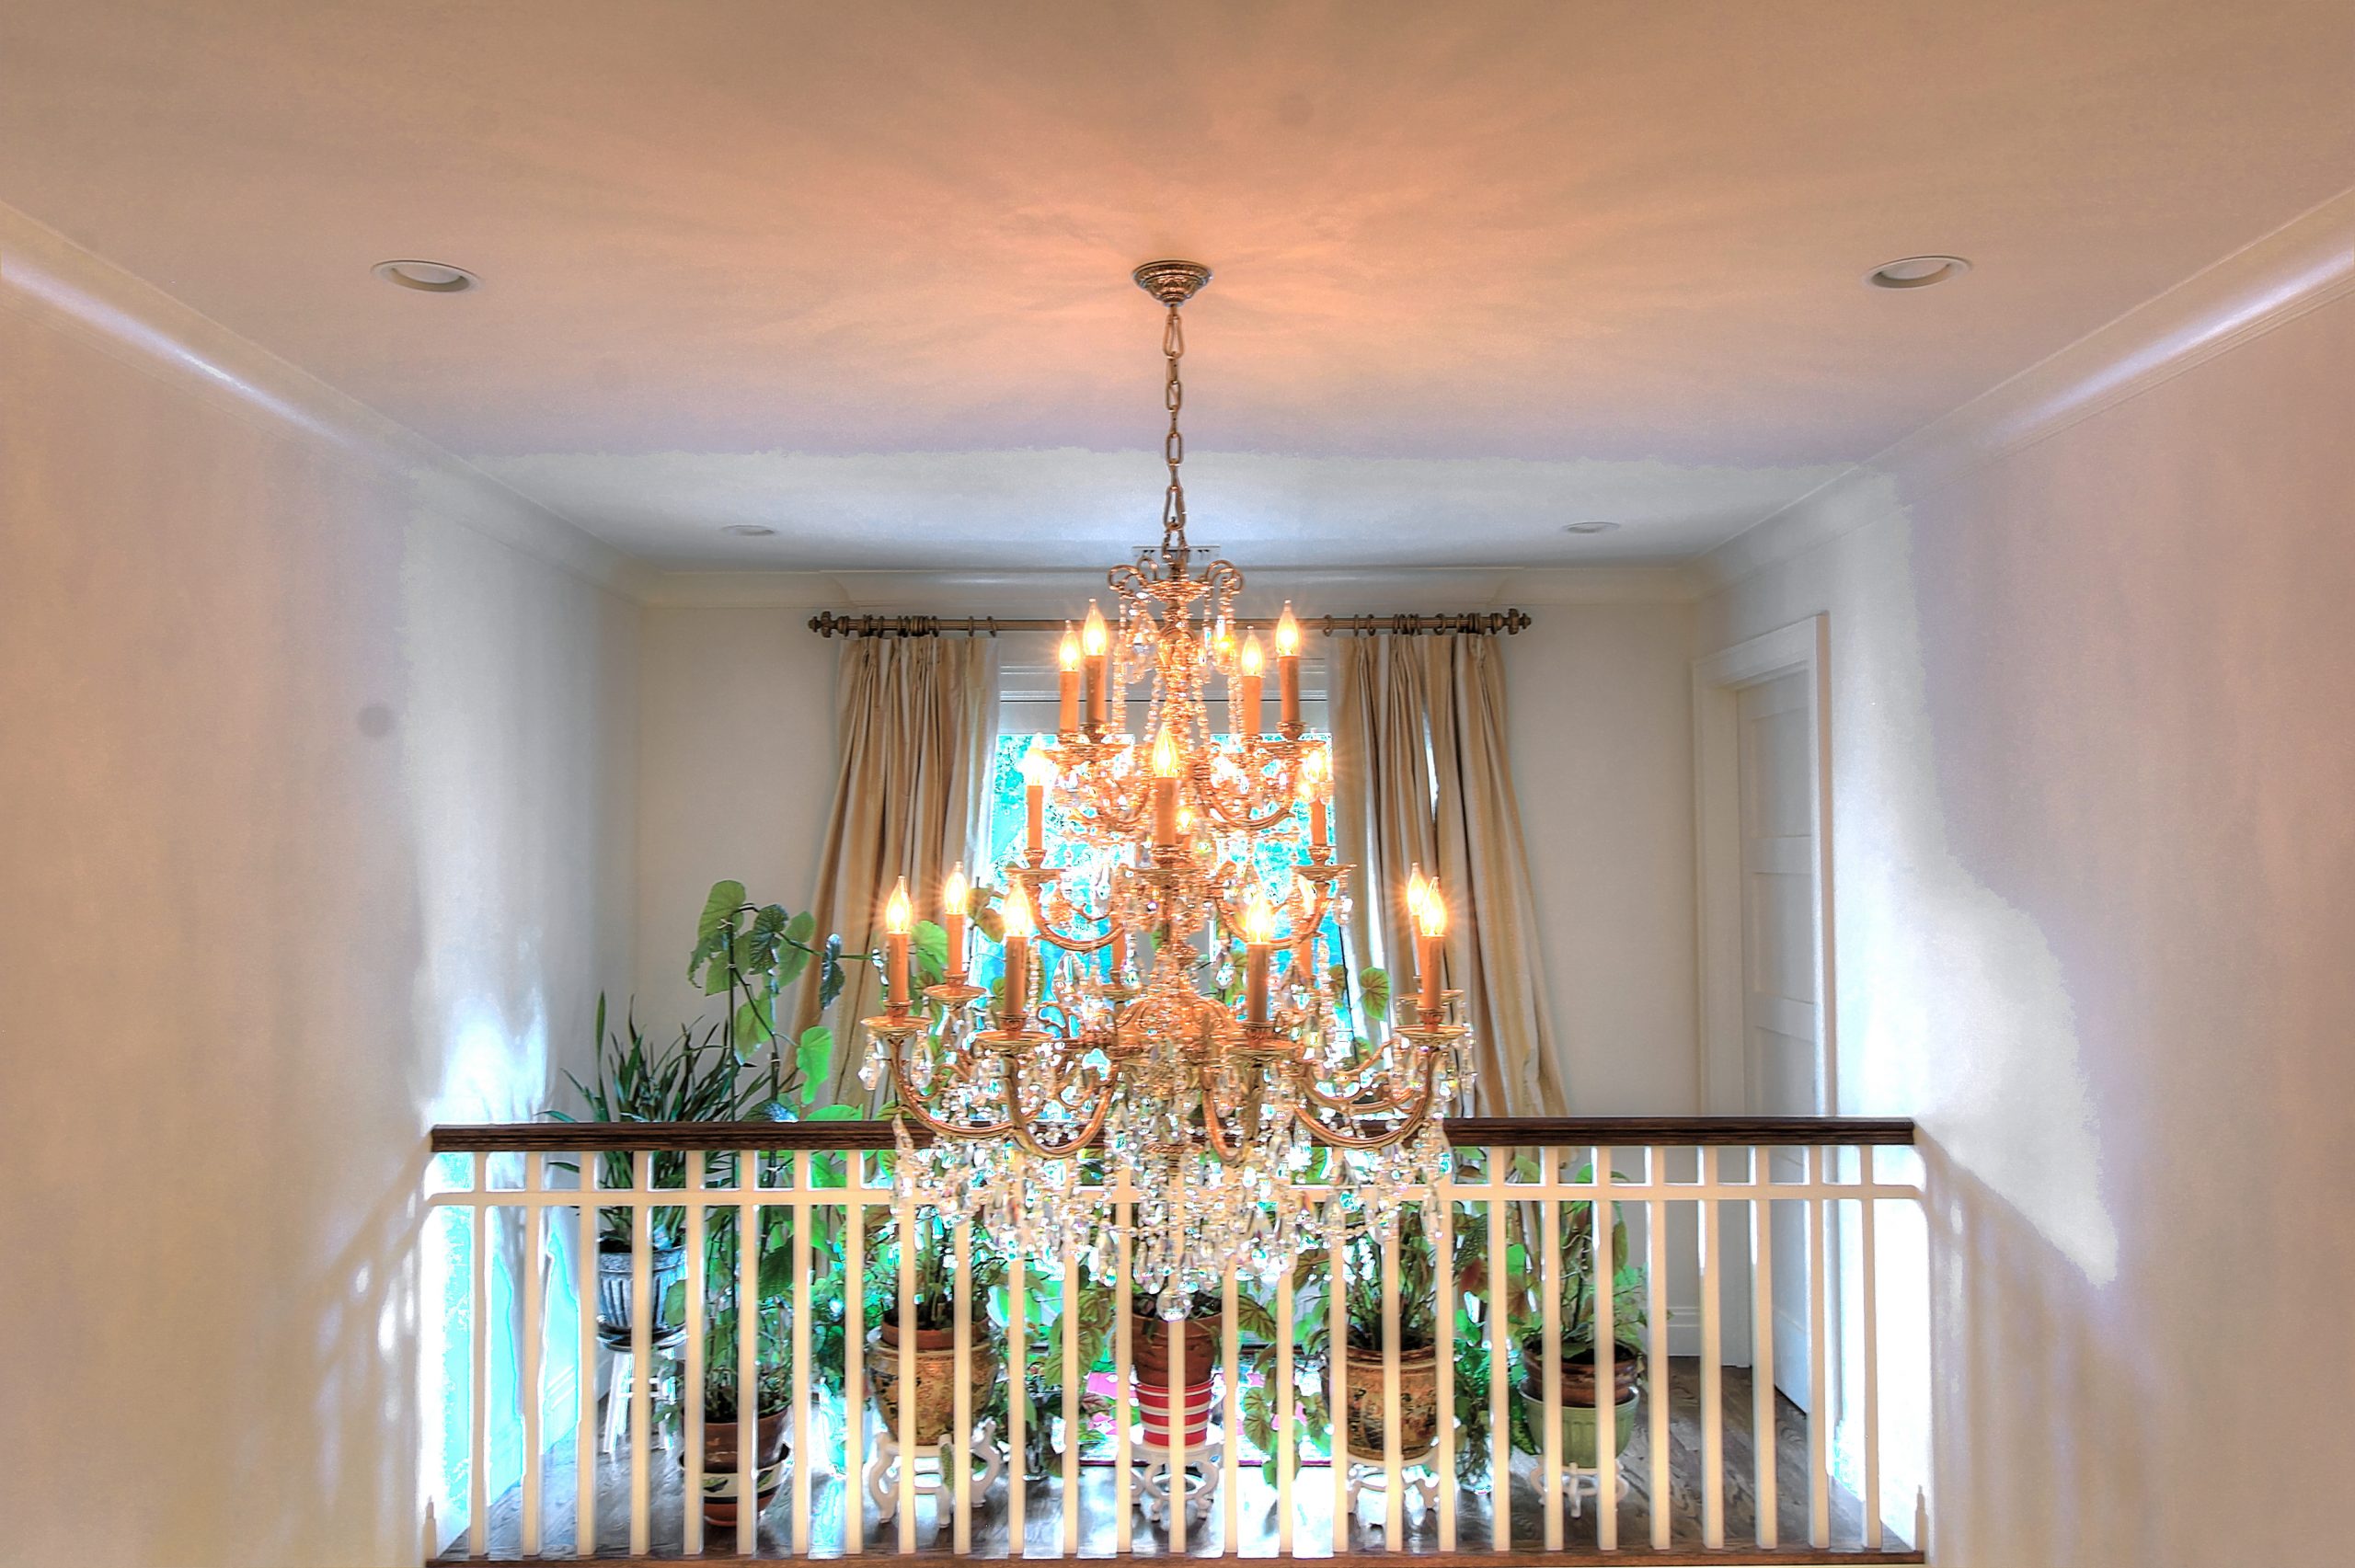 traditional chandelier with chandelier lift installed in a residential home.